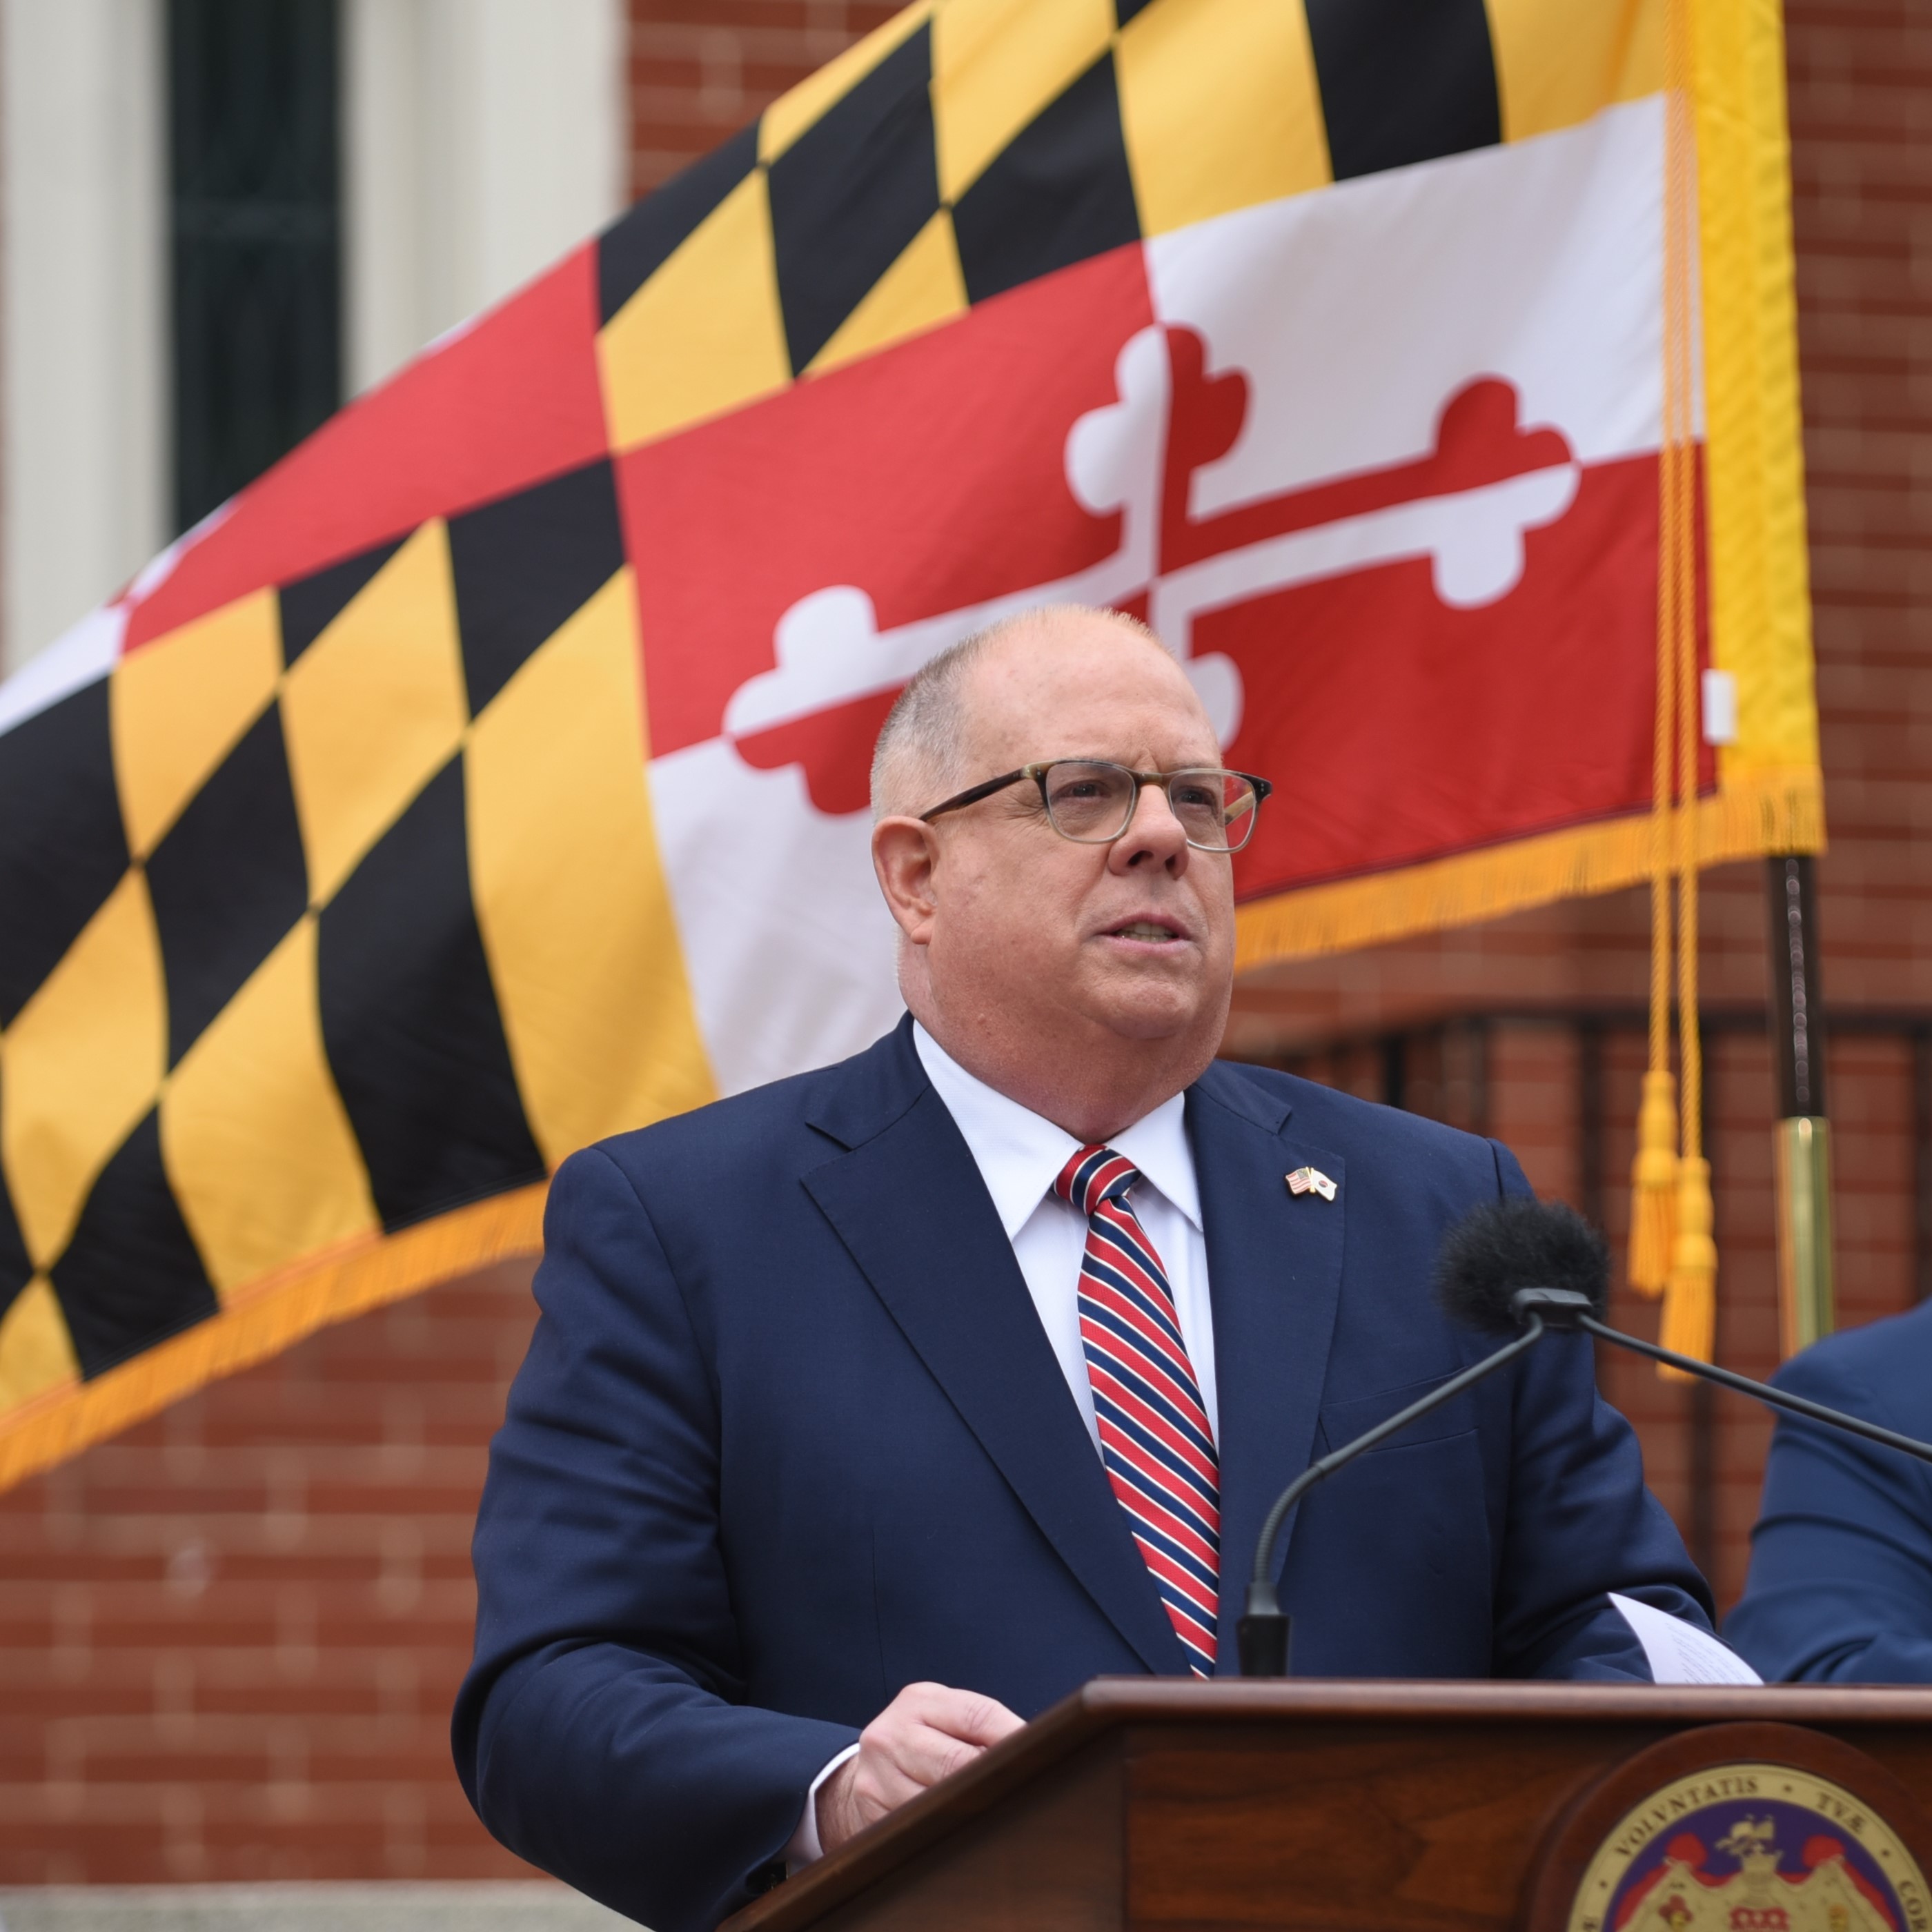 Amid COVID-19 surge, MD Gov. Hogan plays politics with state employee contracts